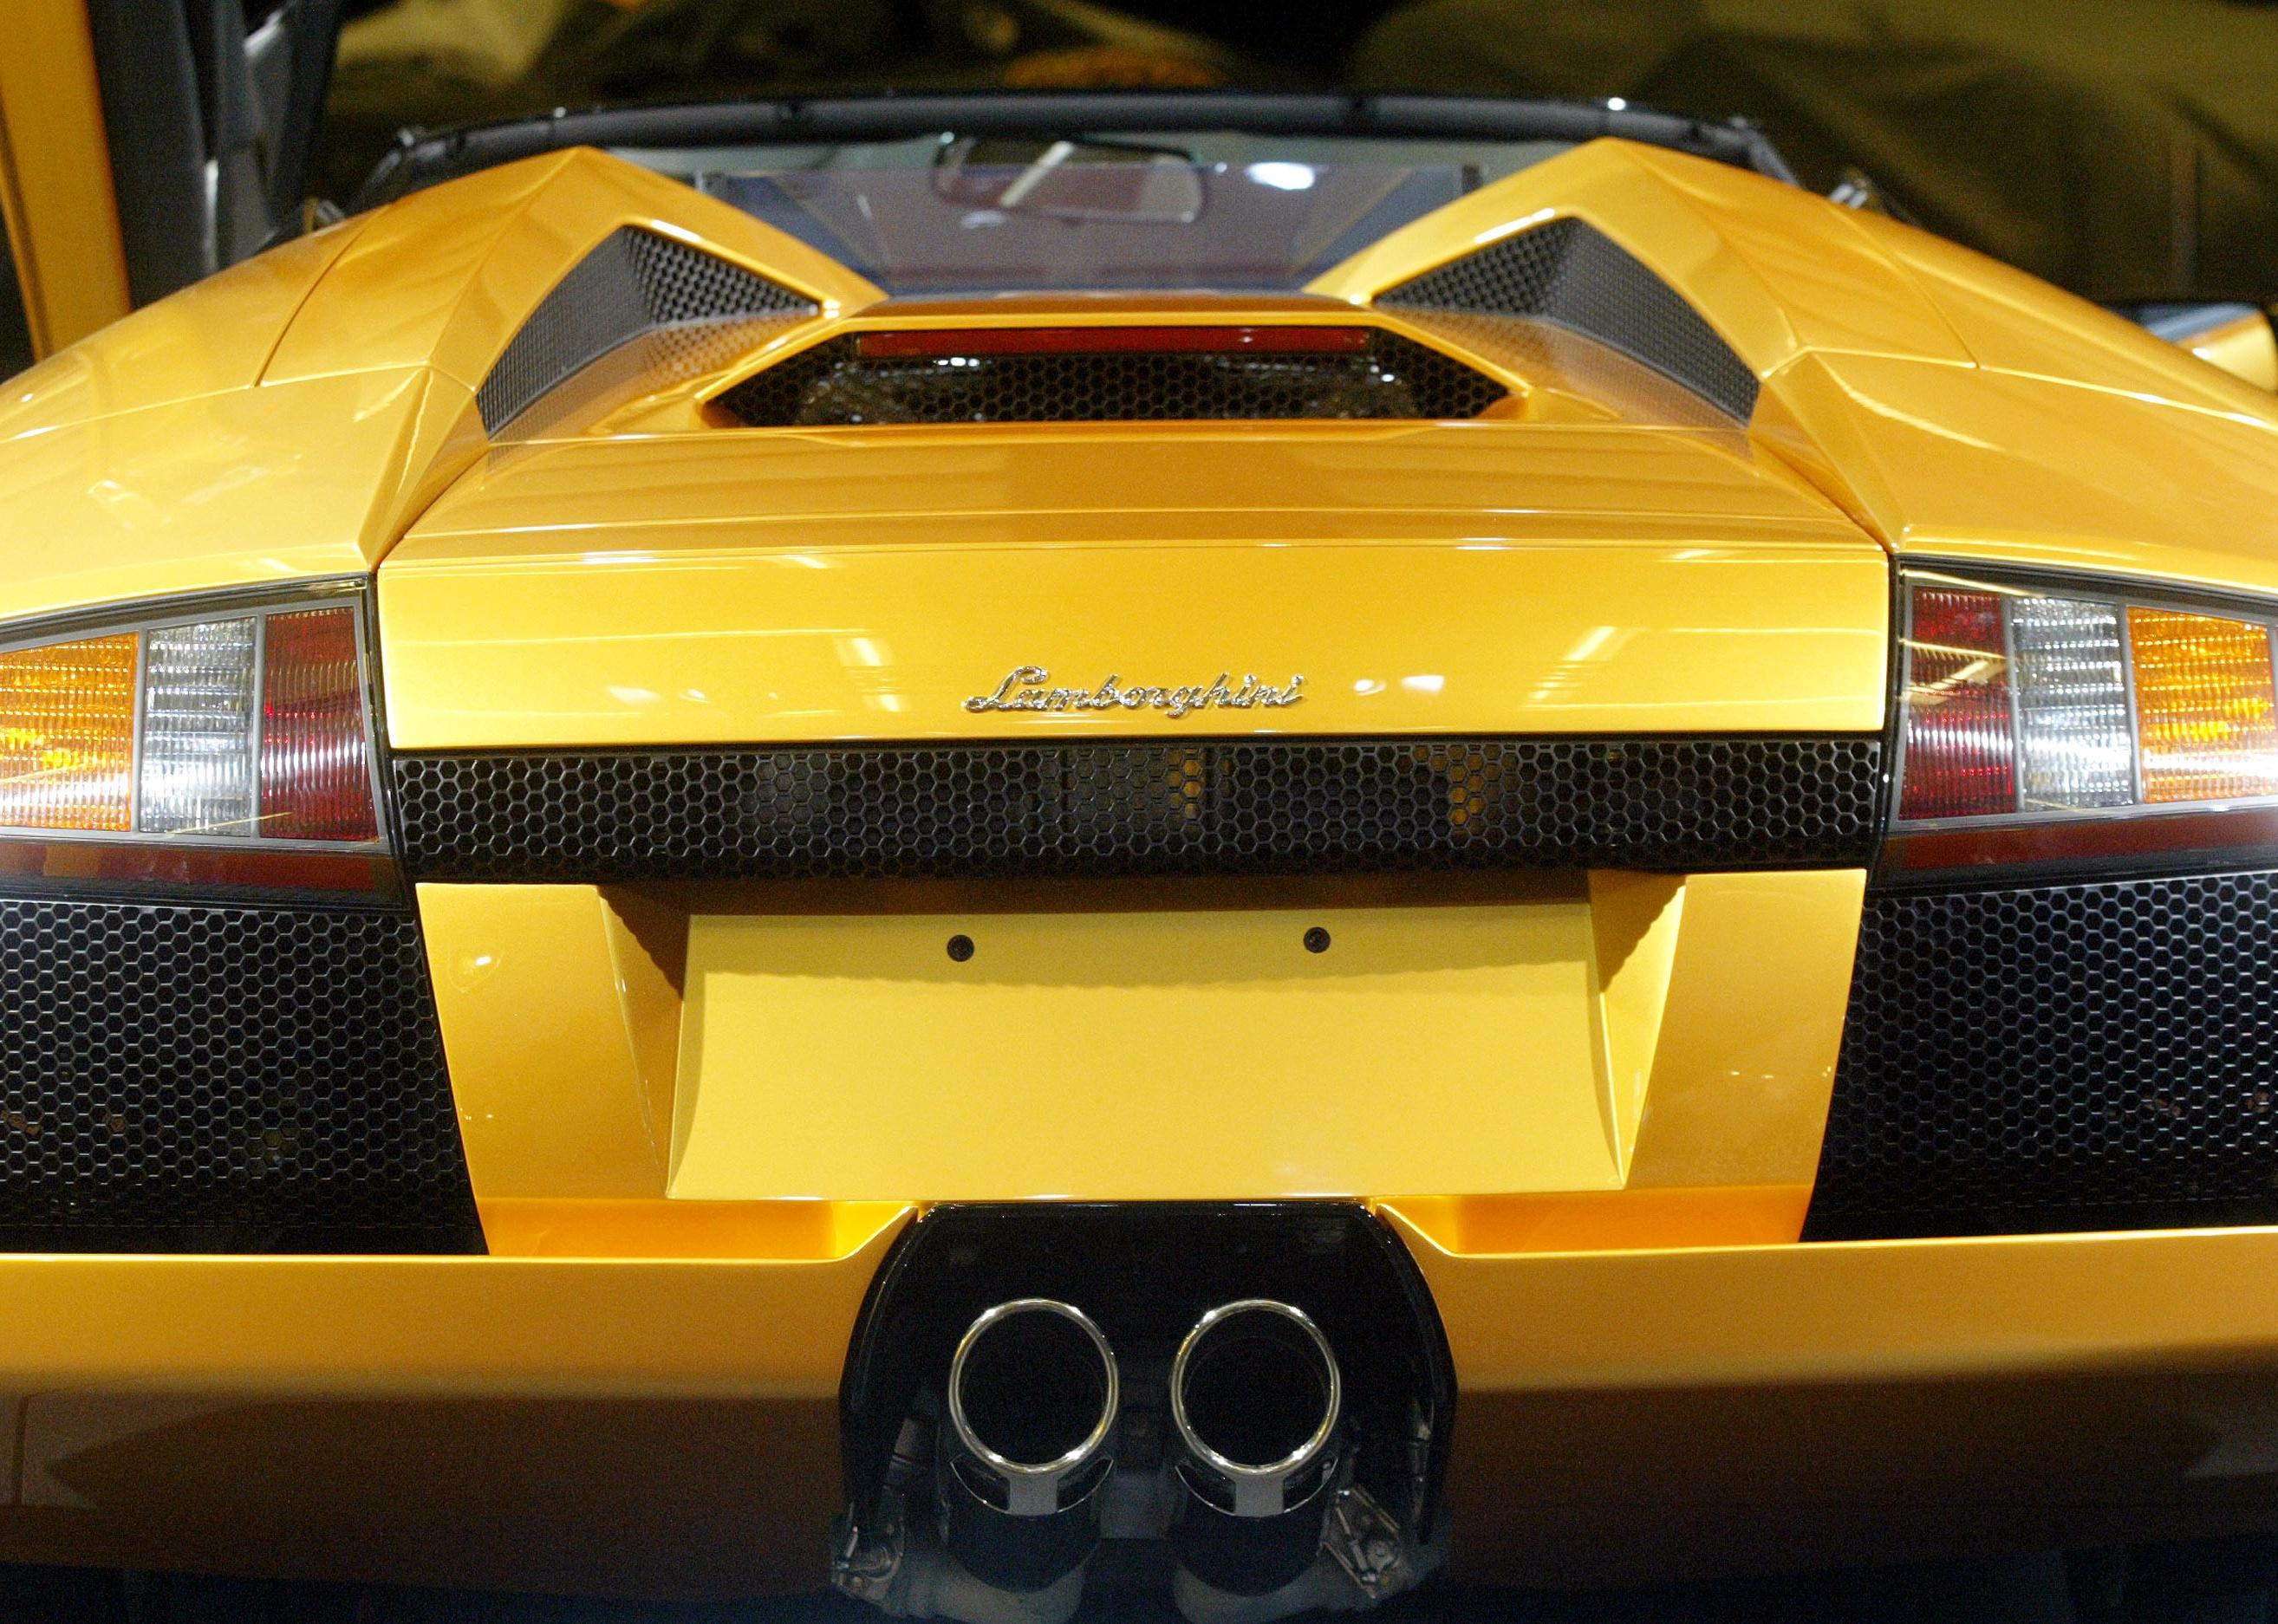 The Lamborghini Murcielago roadster stands on display with close up on logo.